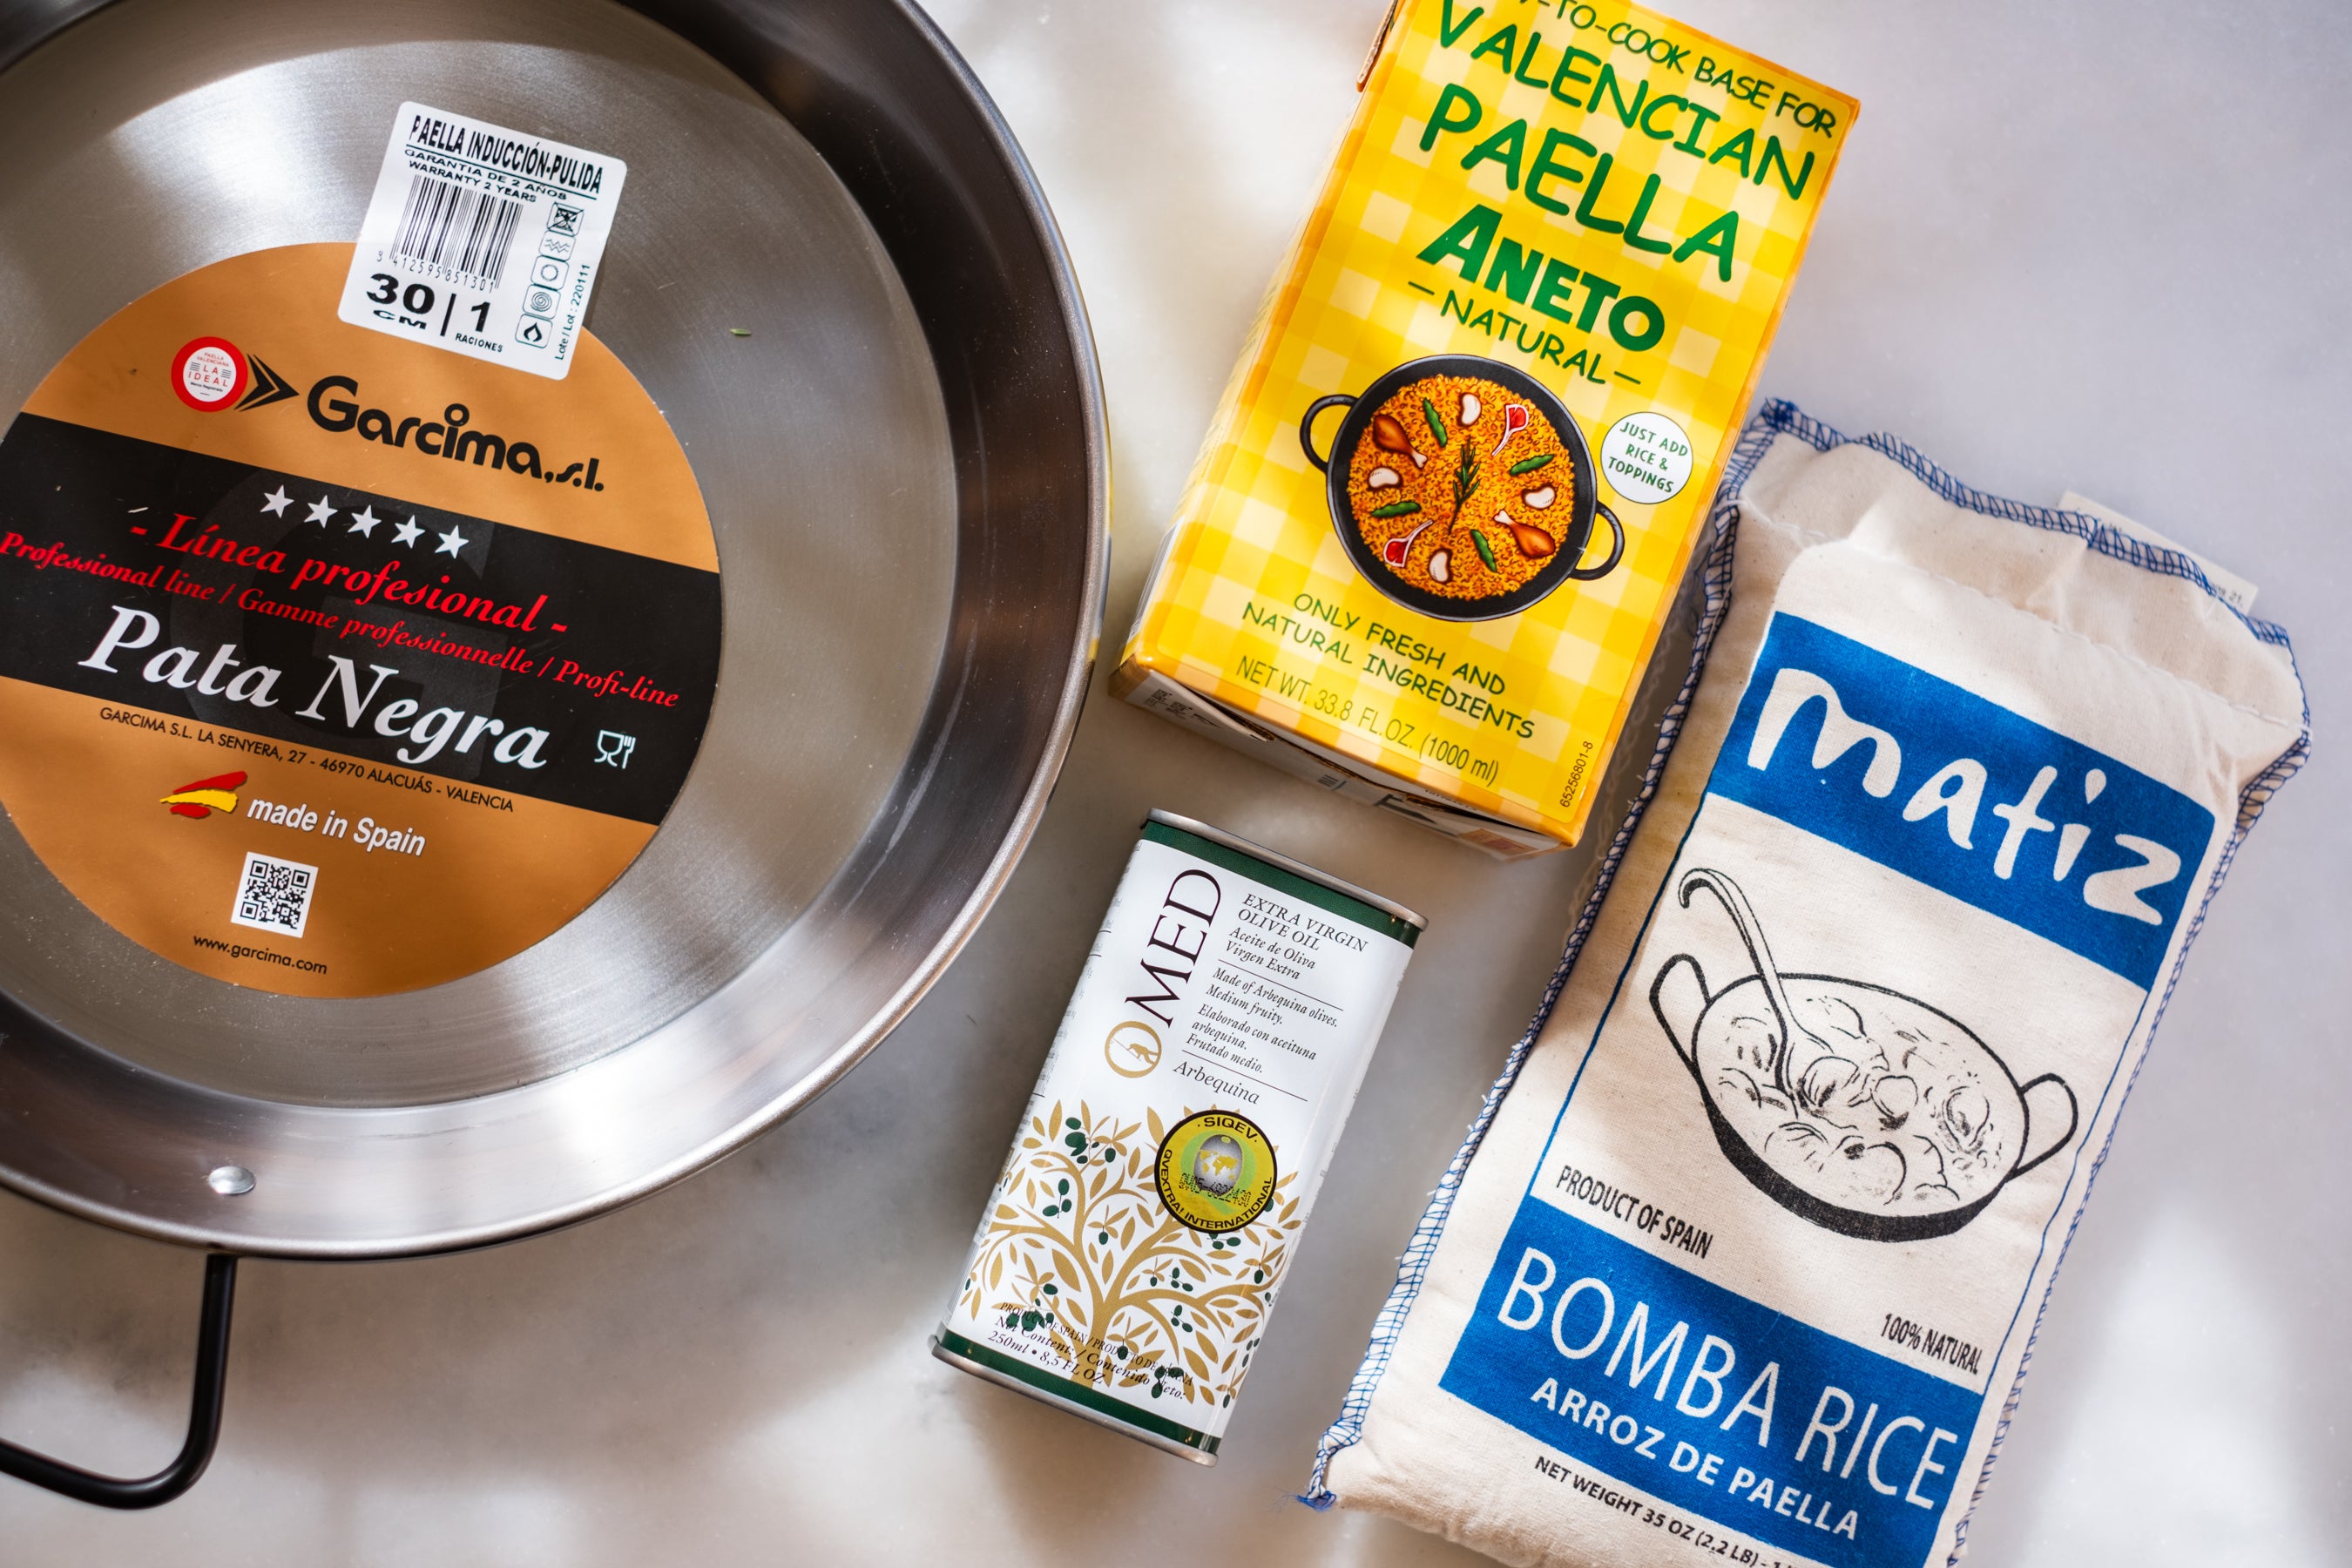 The Great Paella Starter Kit – Cúrate at Home